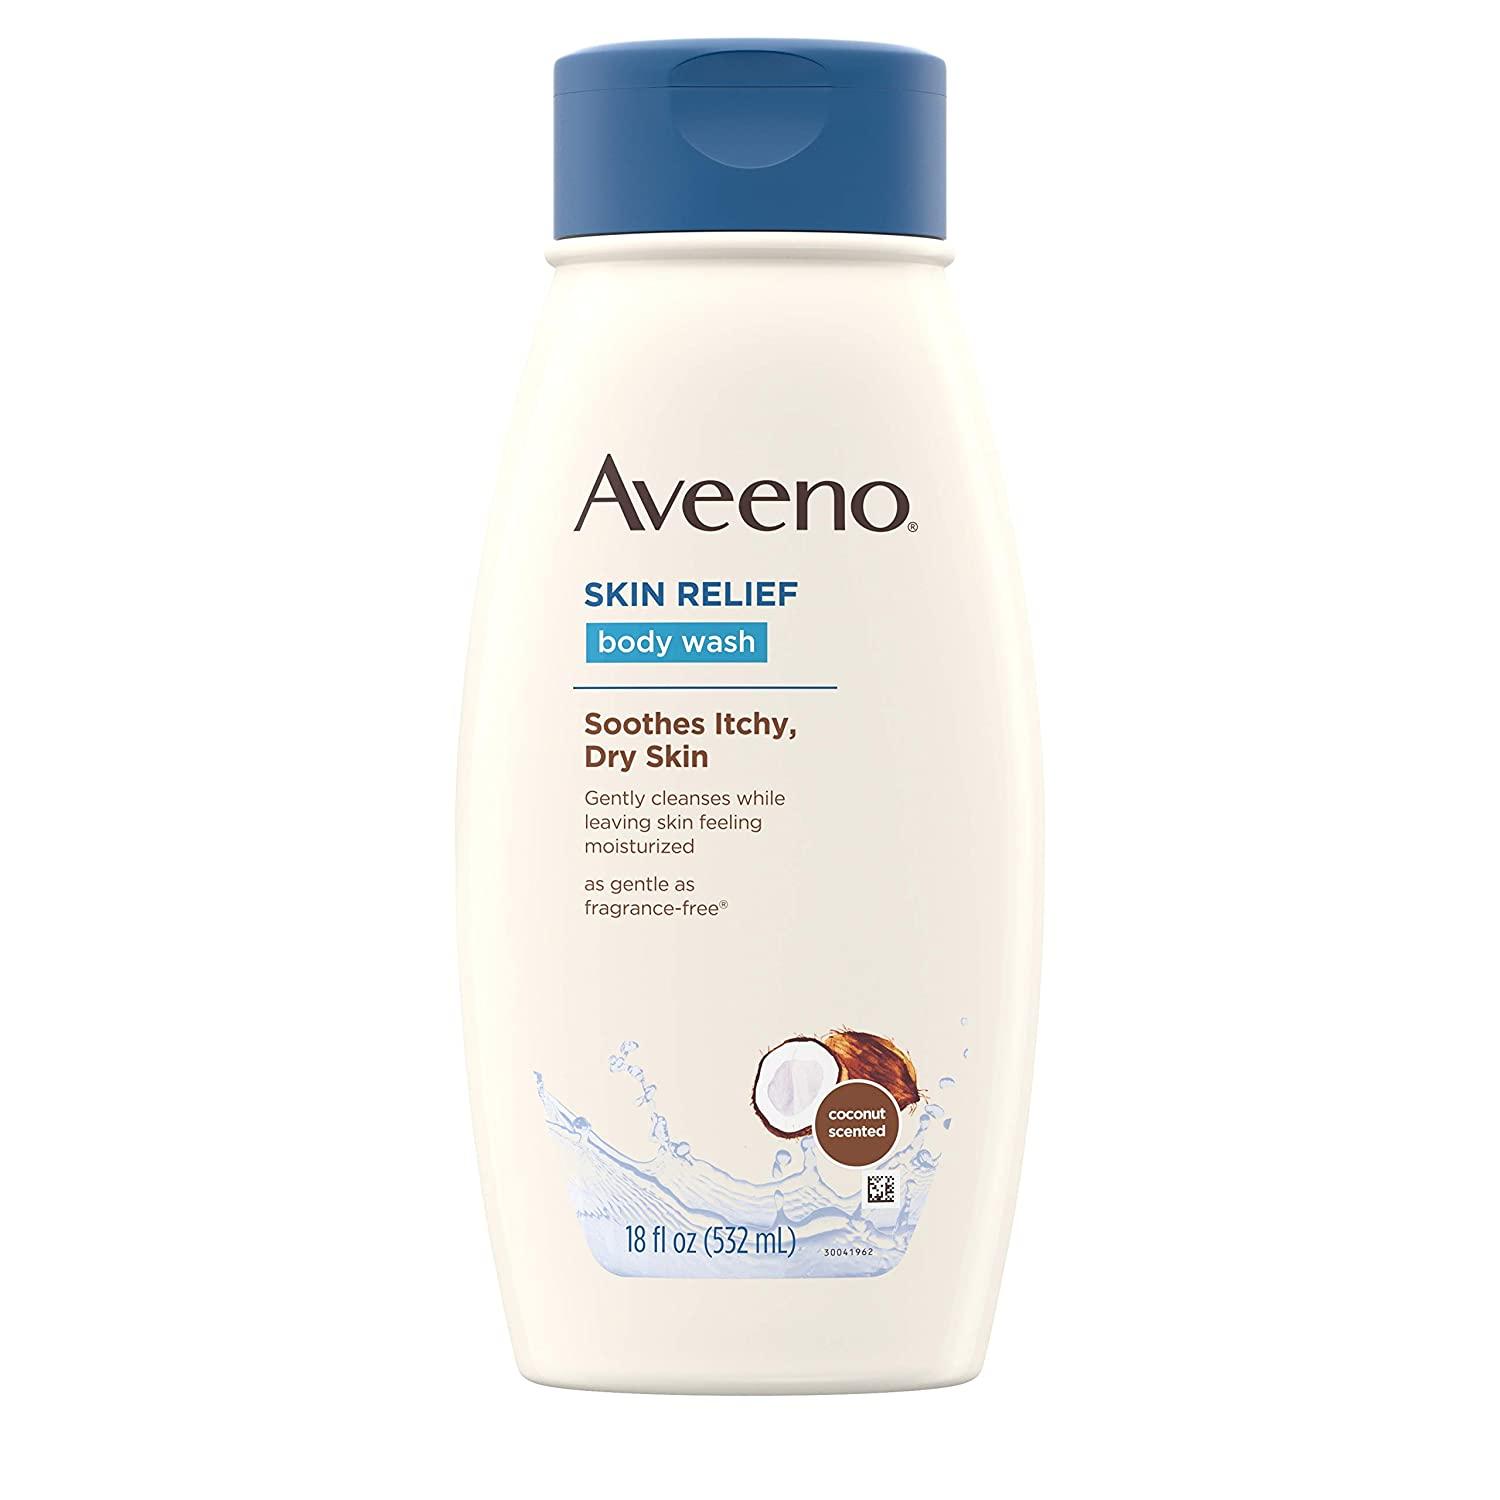 Aveeno Skin Relief Body Wash with Coconut Scent for $4.89 Shipped